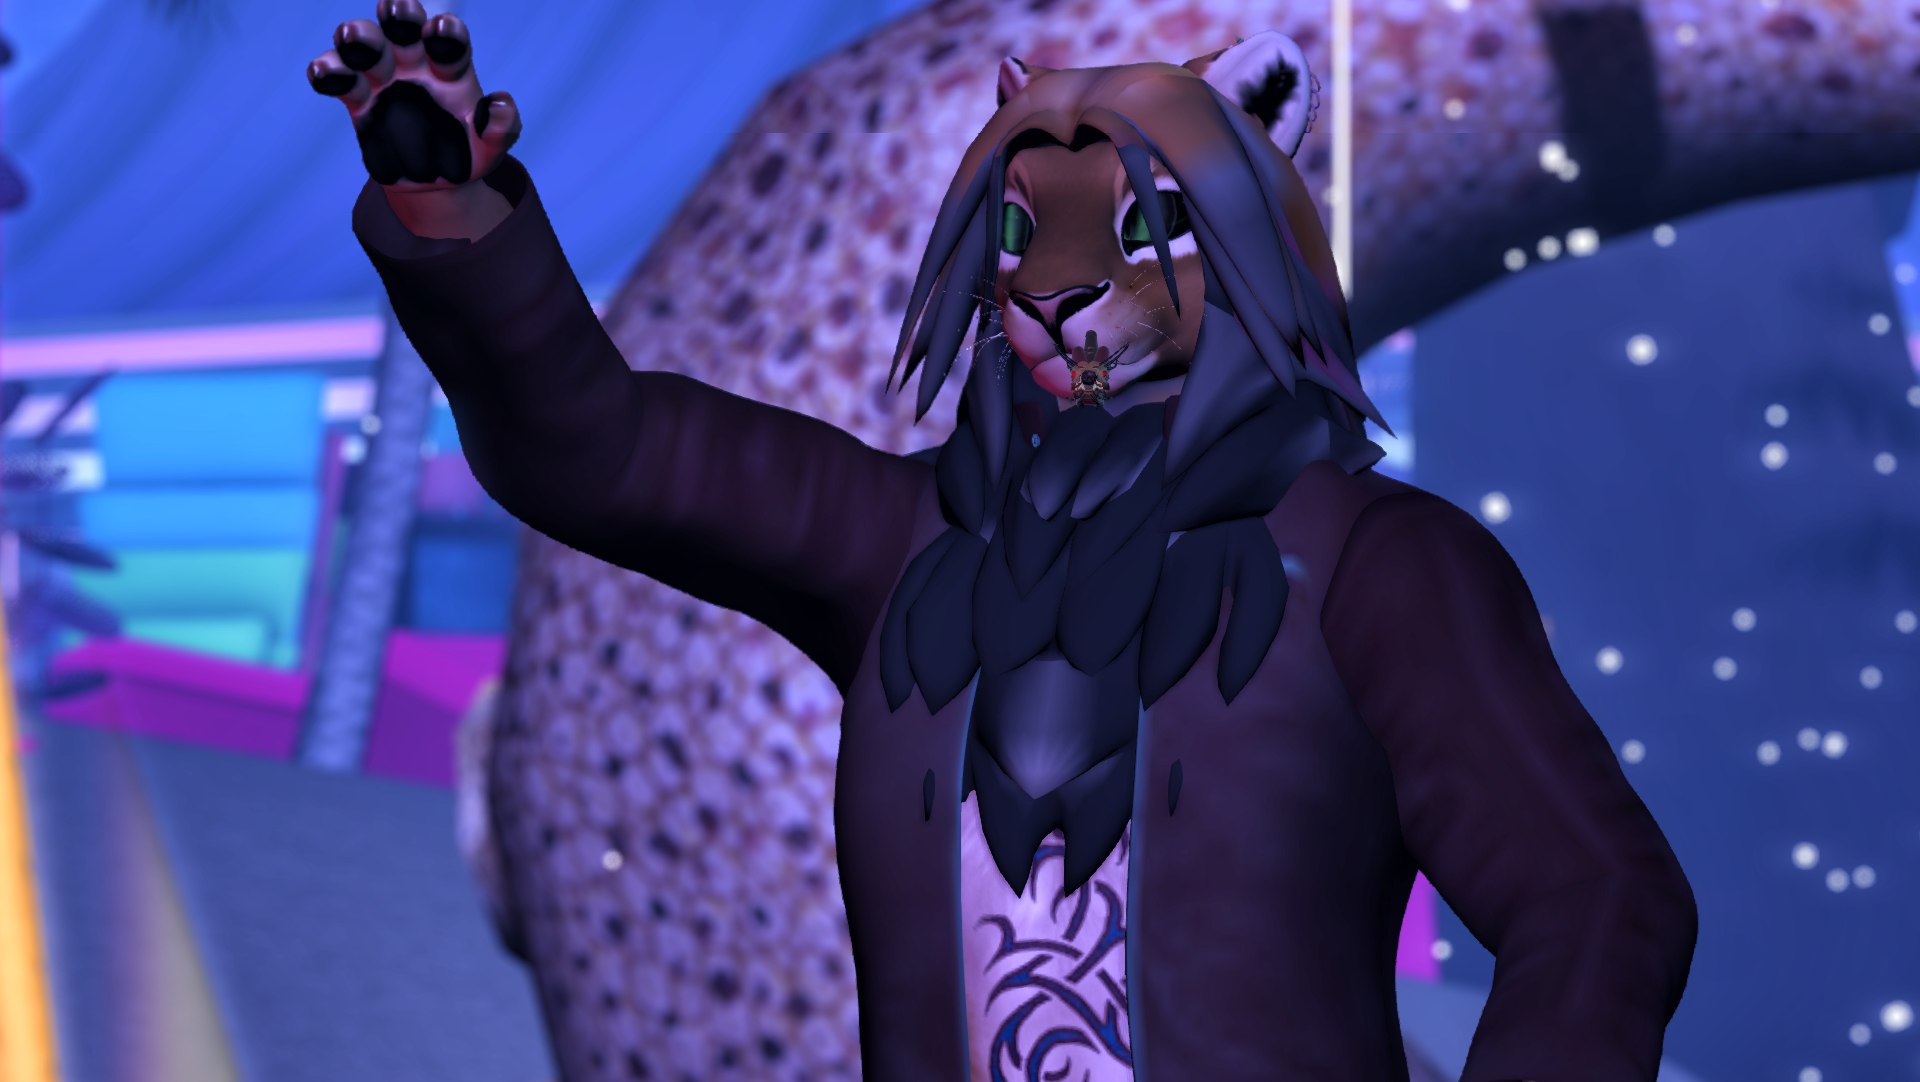 Picture of Aires from Second Life. He’s an anthro lion with brownish-yellow fur wearing a jacket and waving at the camera.